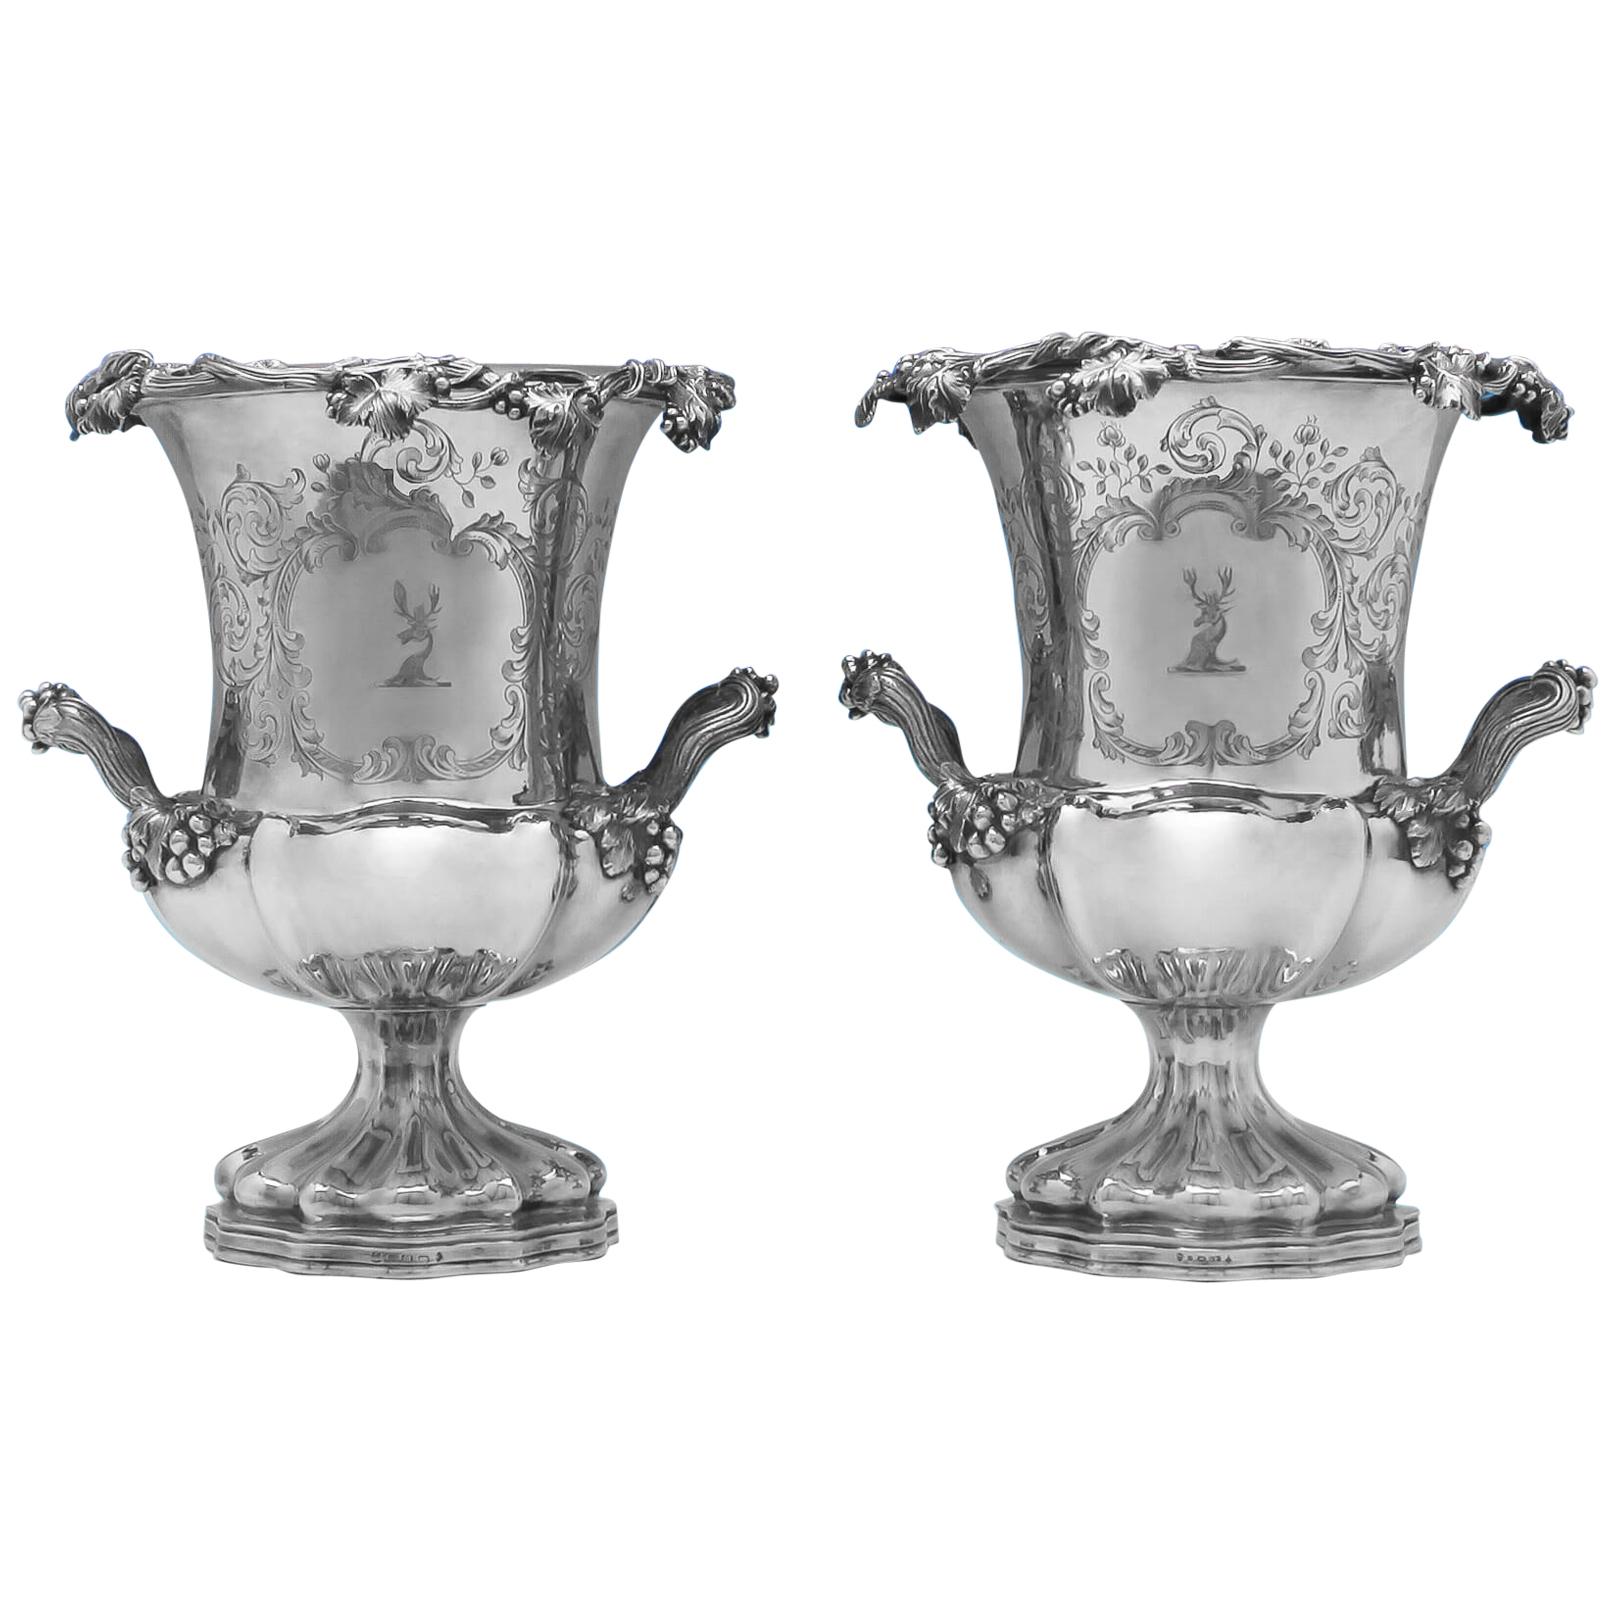 Victorian Antique Silver Plated Pair of Wine Coolers by Elkington, Mason & Co.